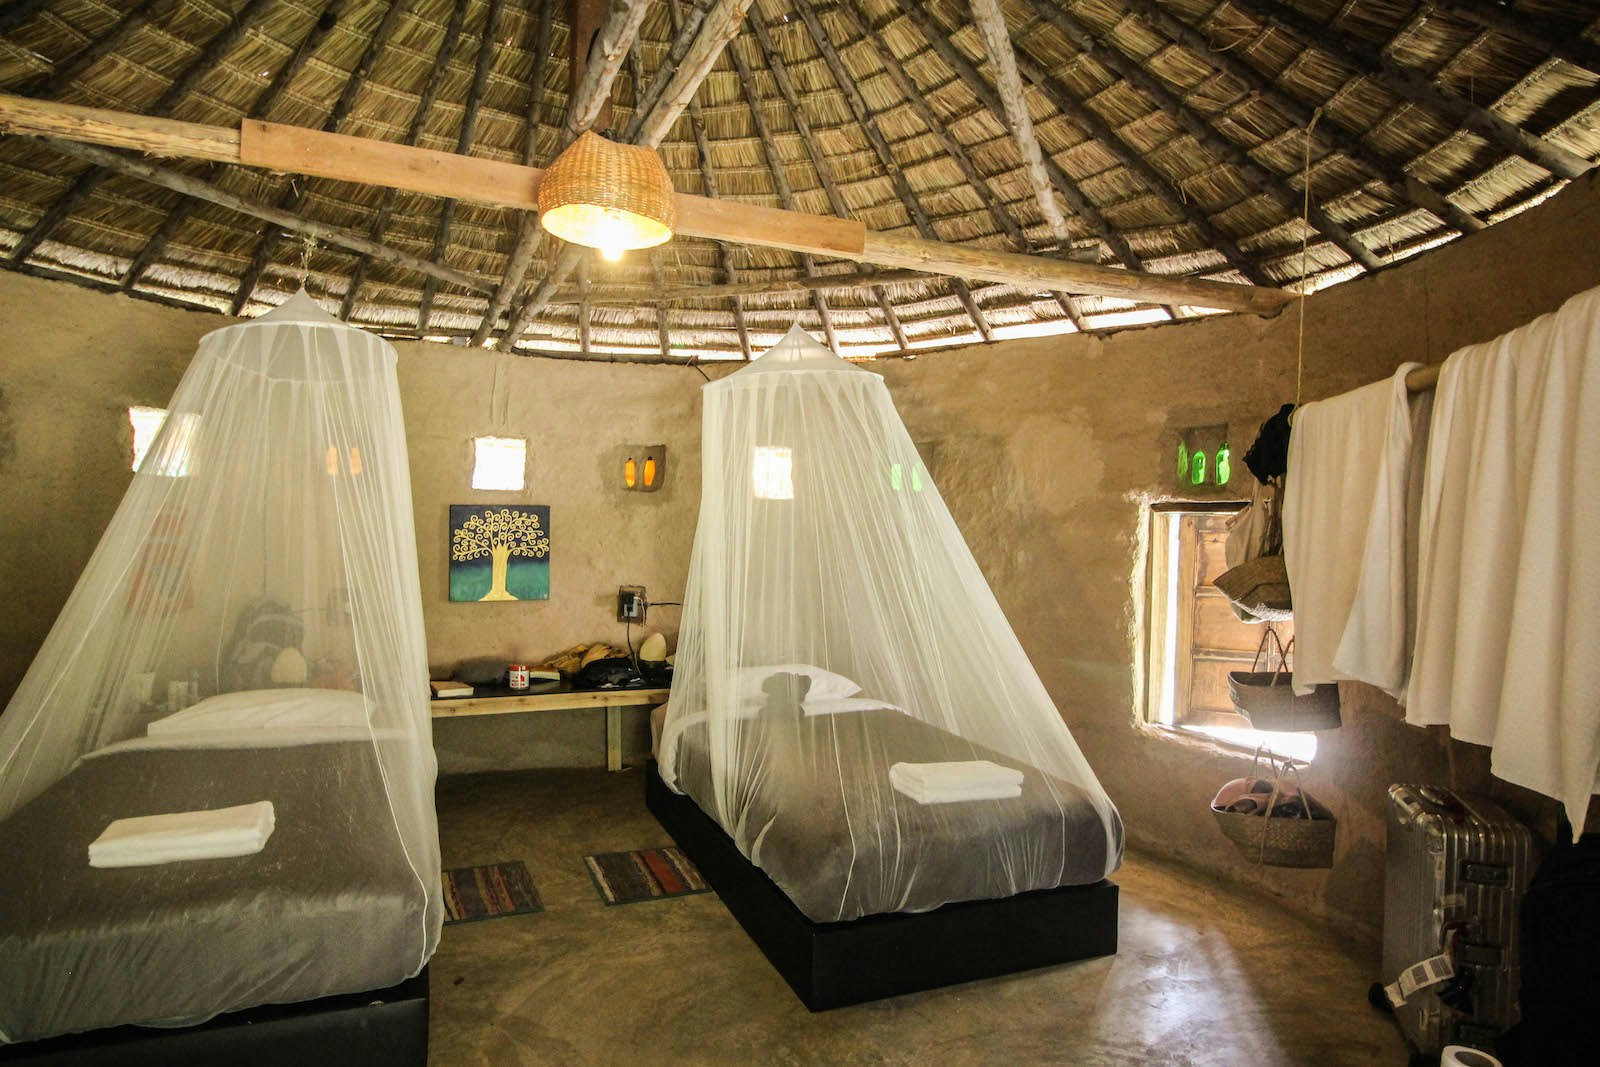 Two twin size beds with fishnet hanging over them inside a circular room